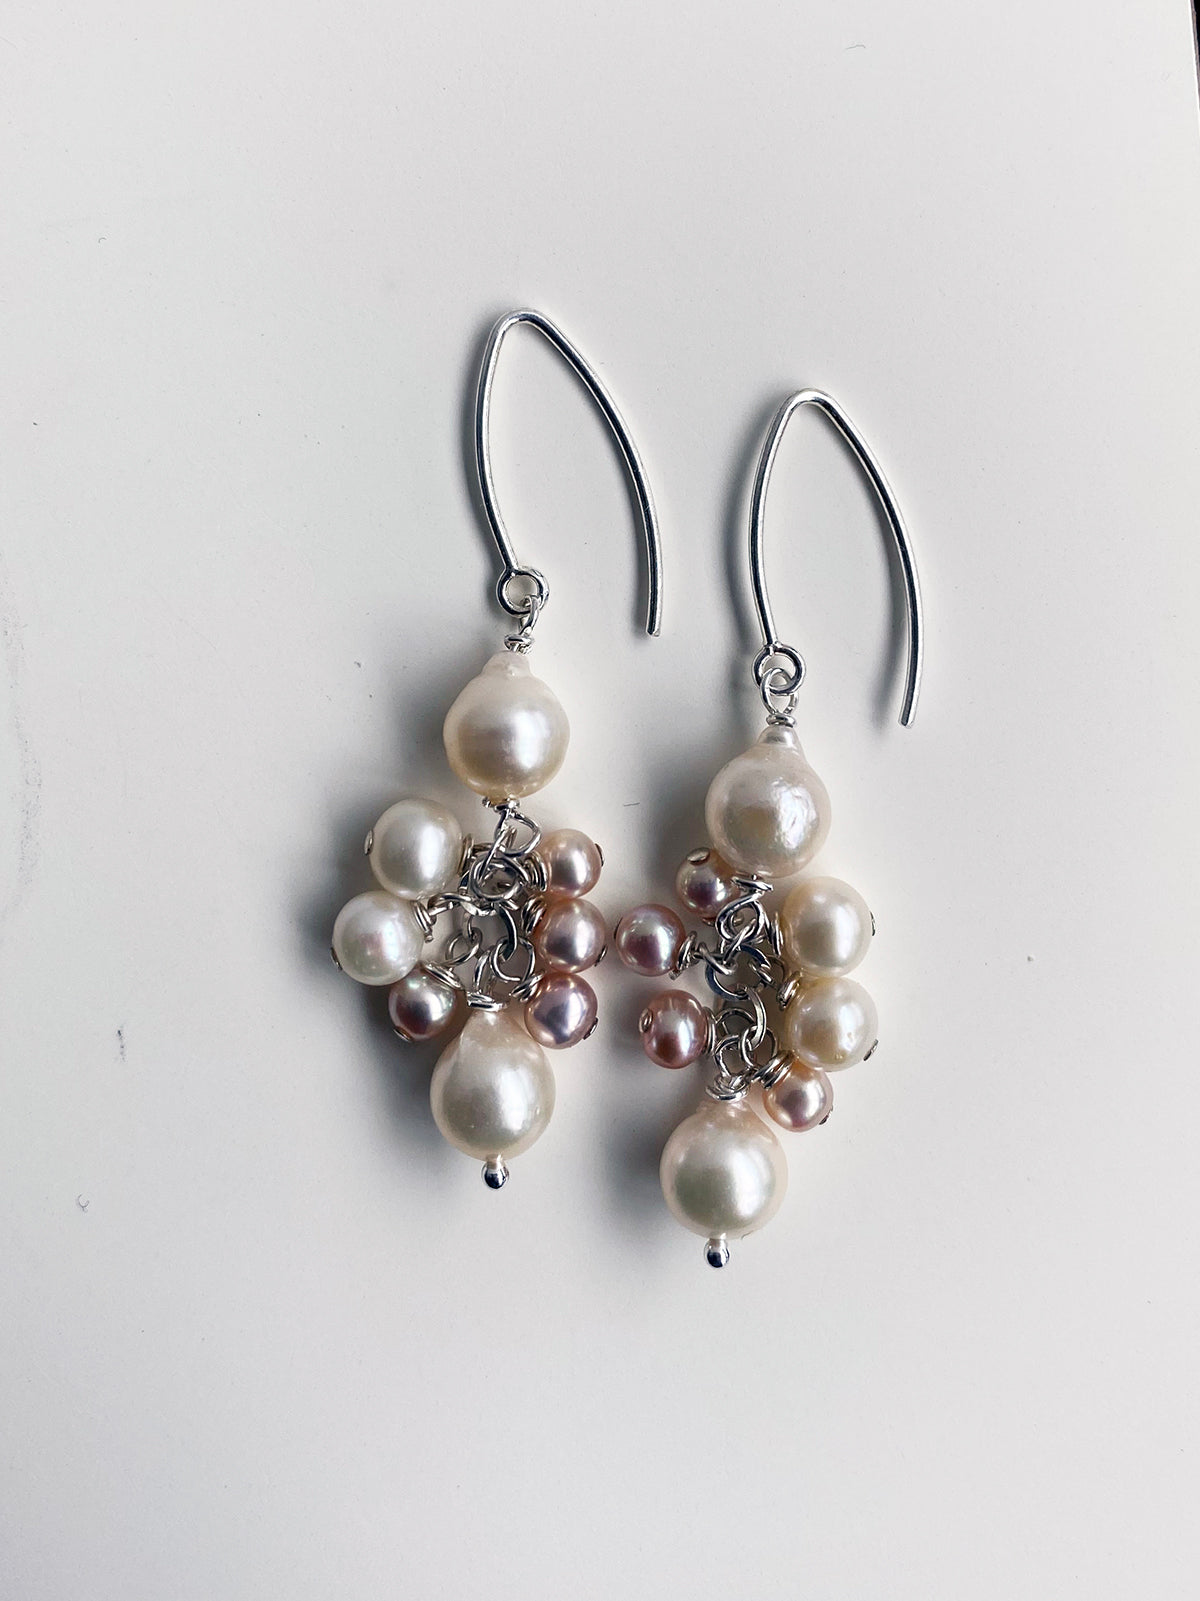 Creamy Akoya Pearls with a White and Champagne Cluster by Linda Queally